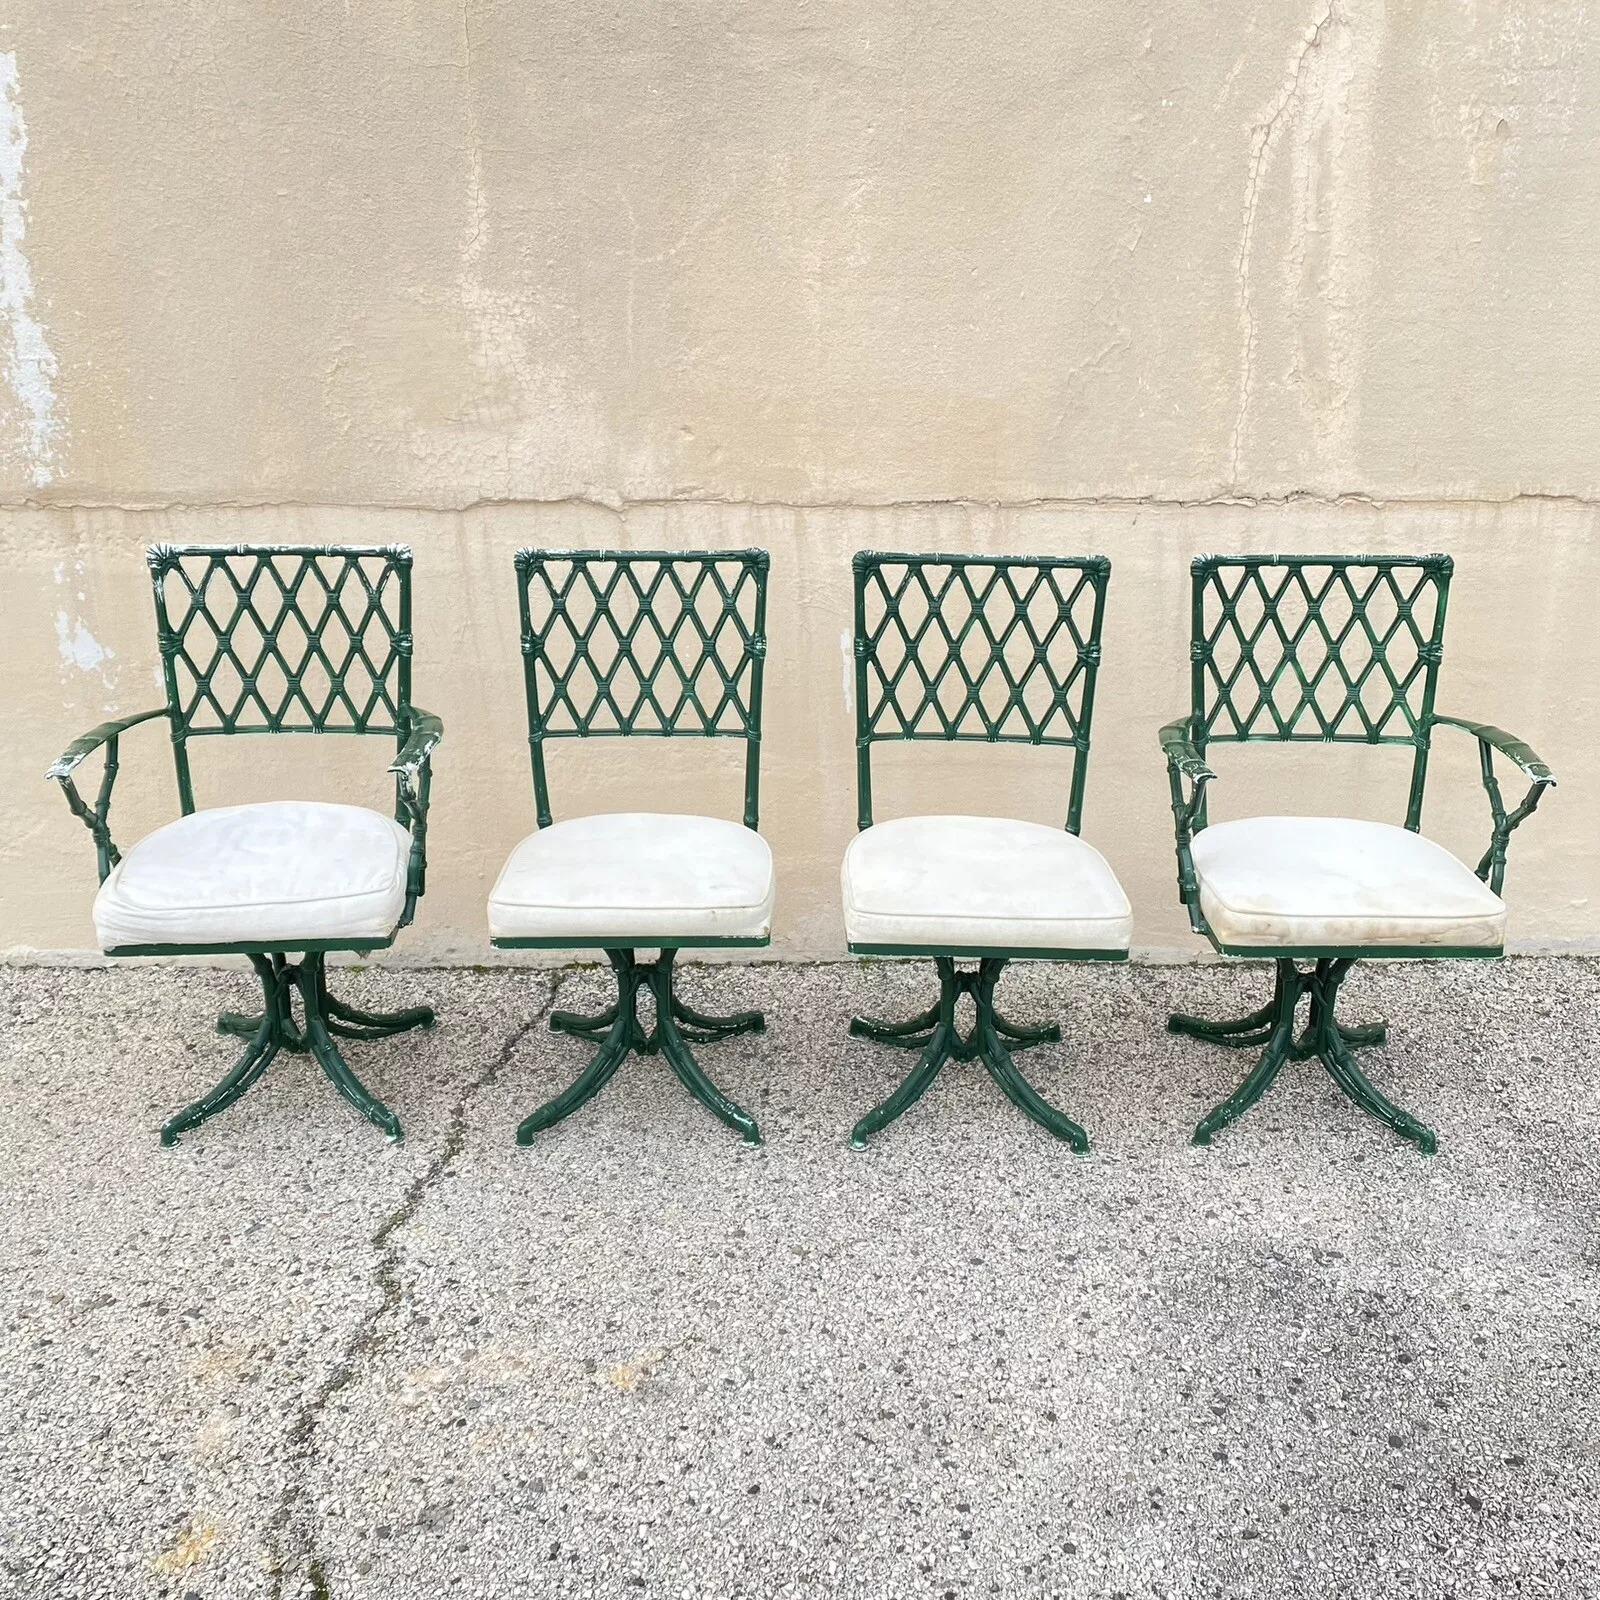 Vintage Hollywood Regency Faux Bamboo Lattice Metal Green Dining Set - 5 Pc Set In Good Condition For Sale In Philadelphia, PA